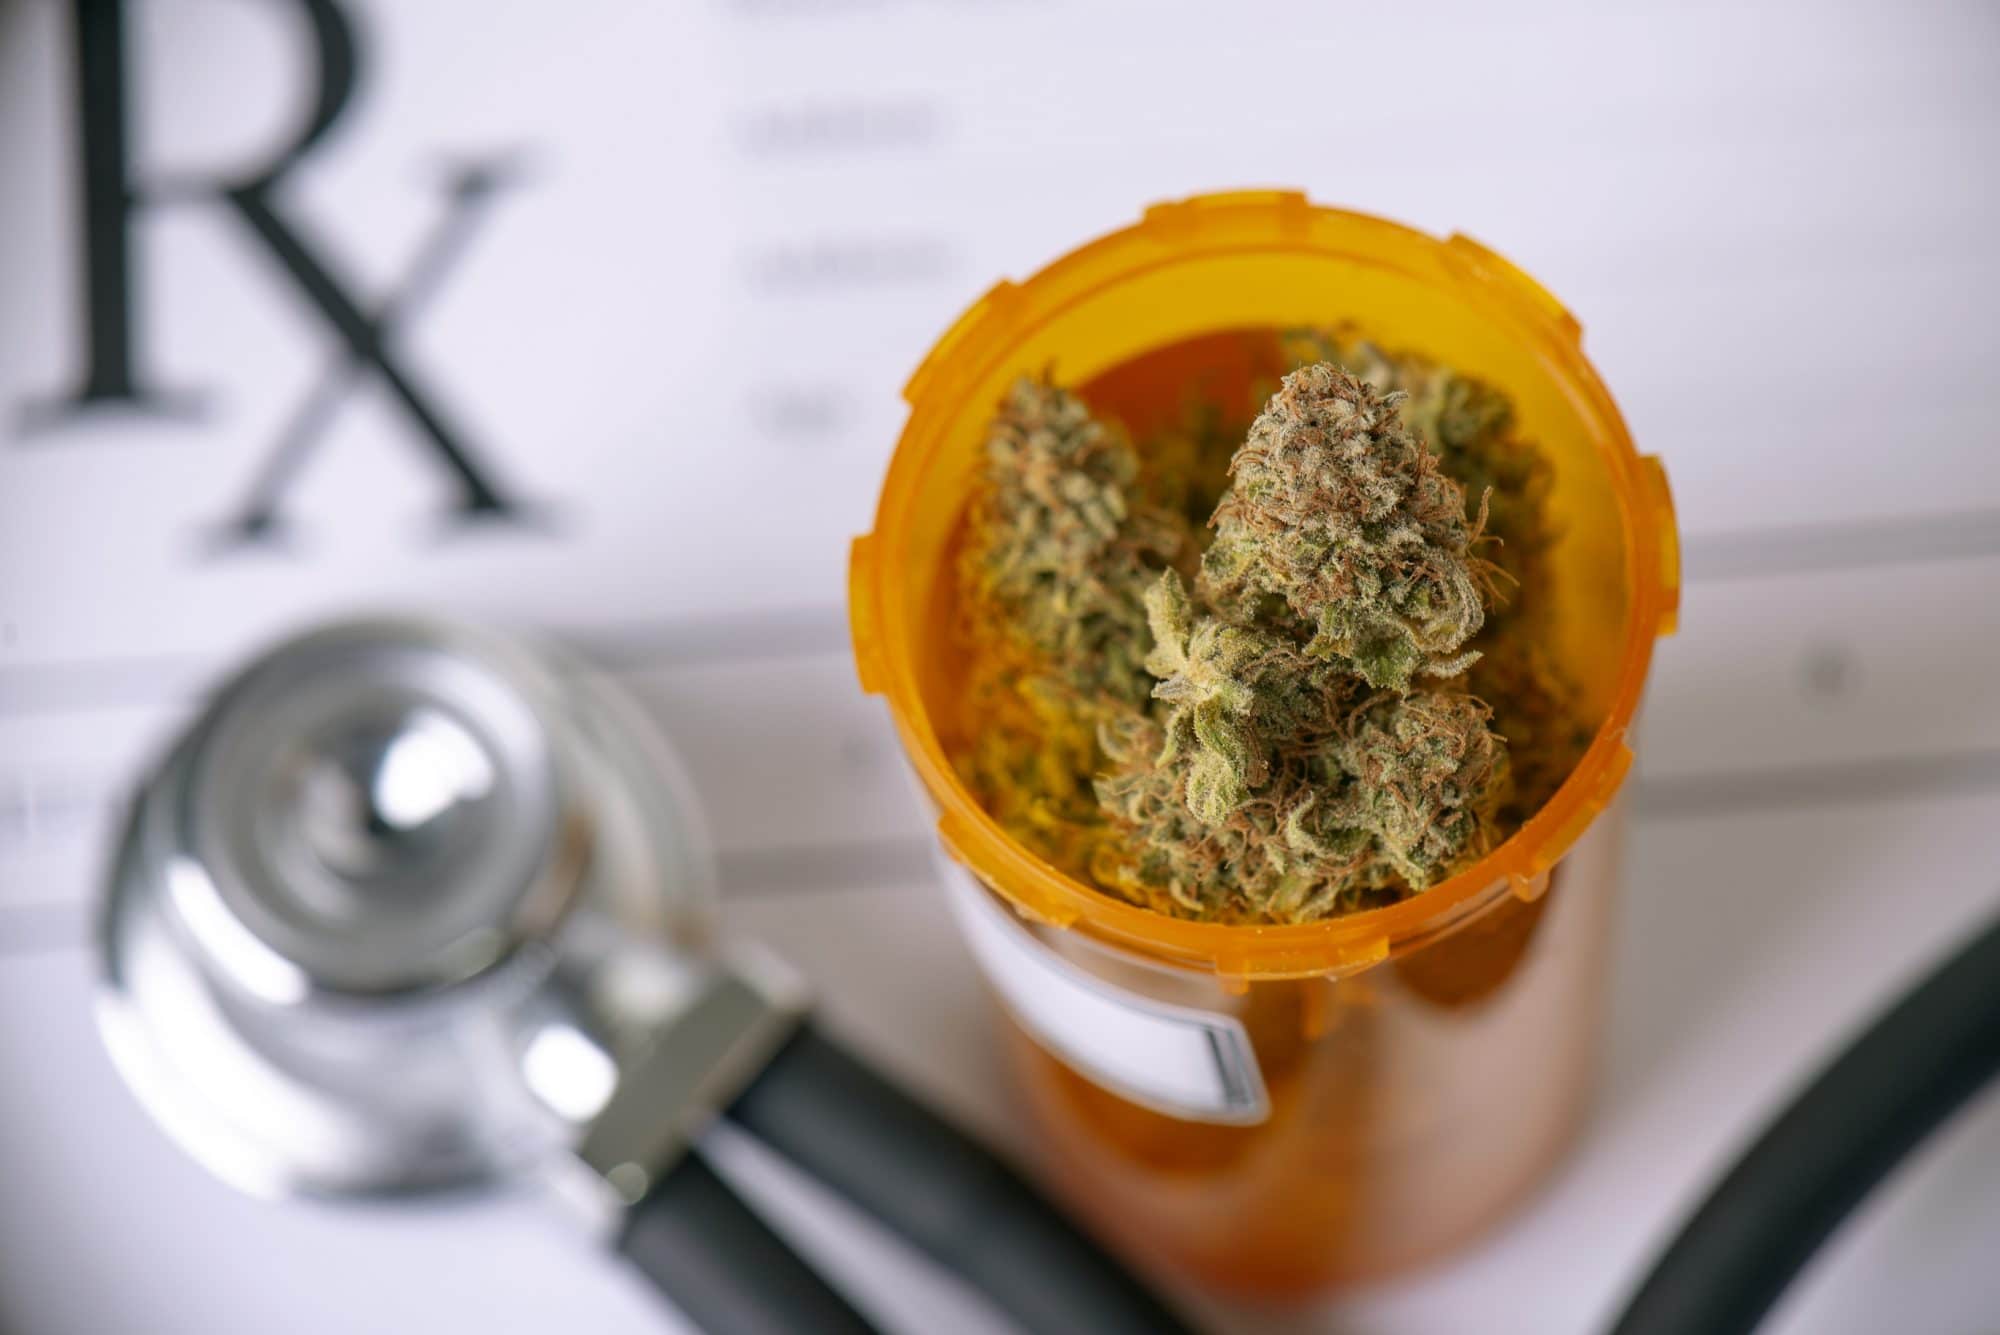 The use of medical cannabis in the UK